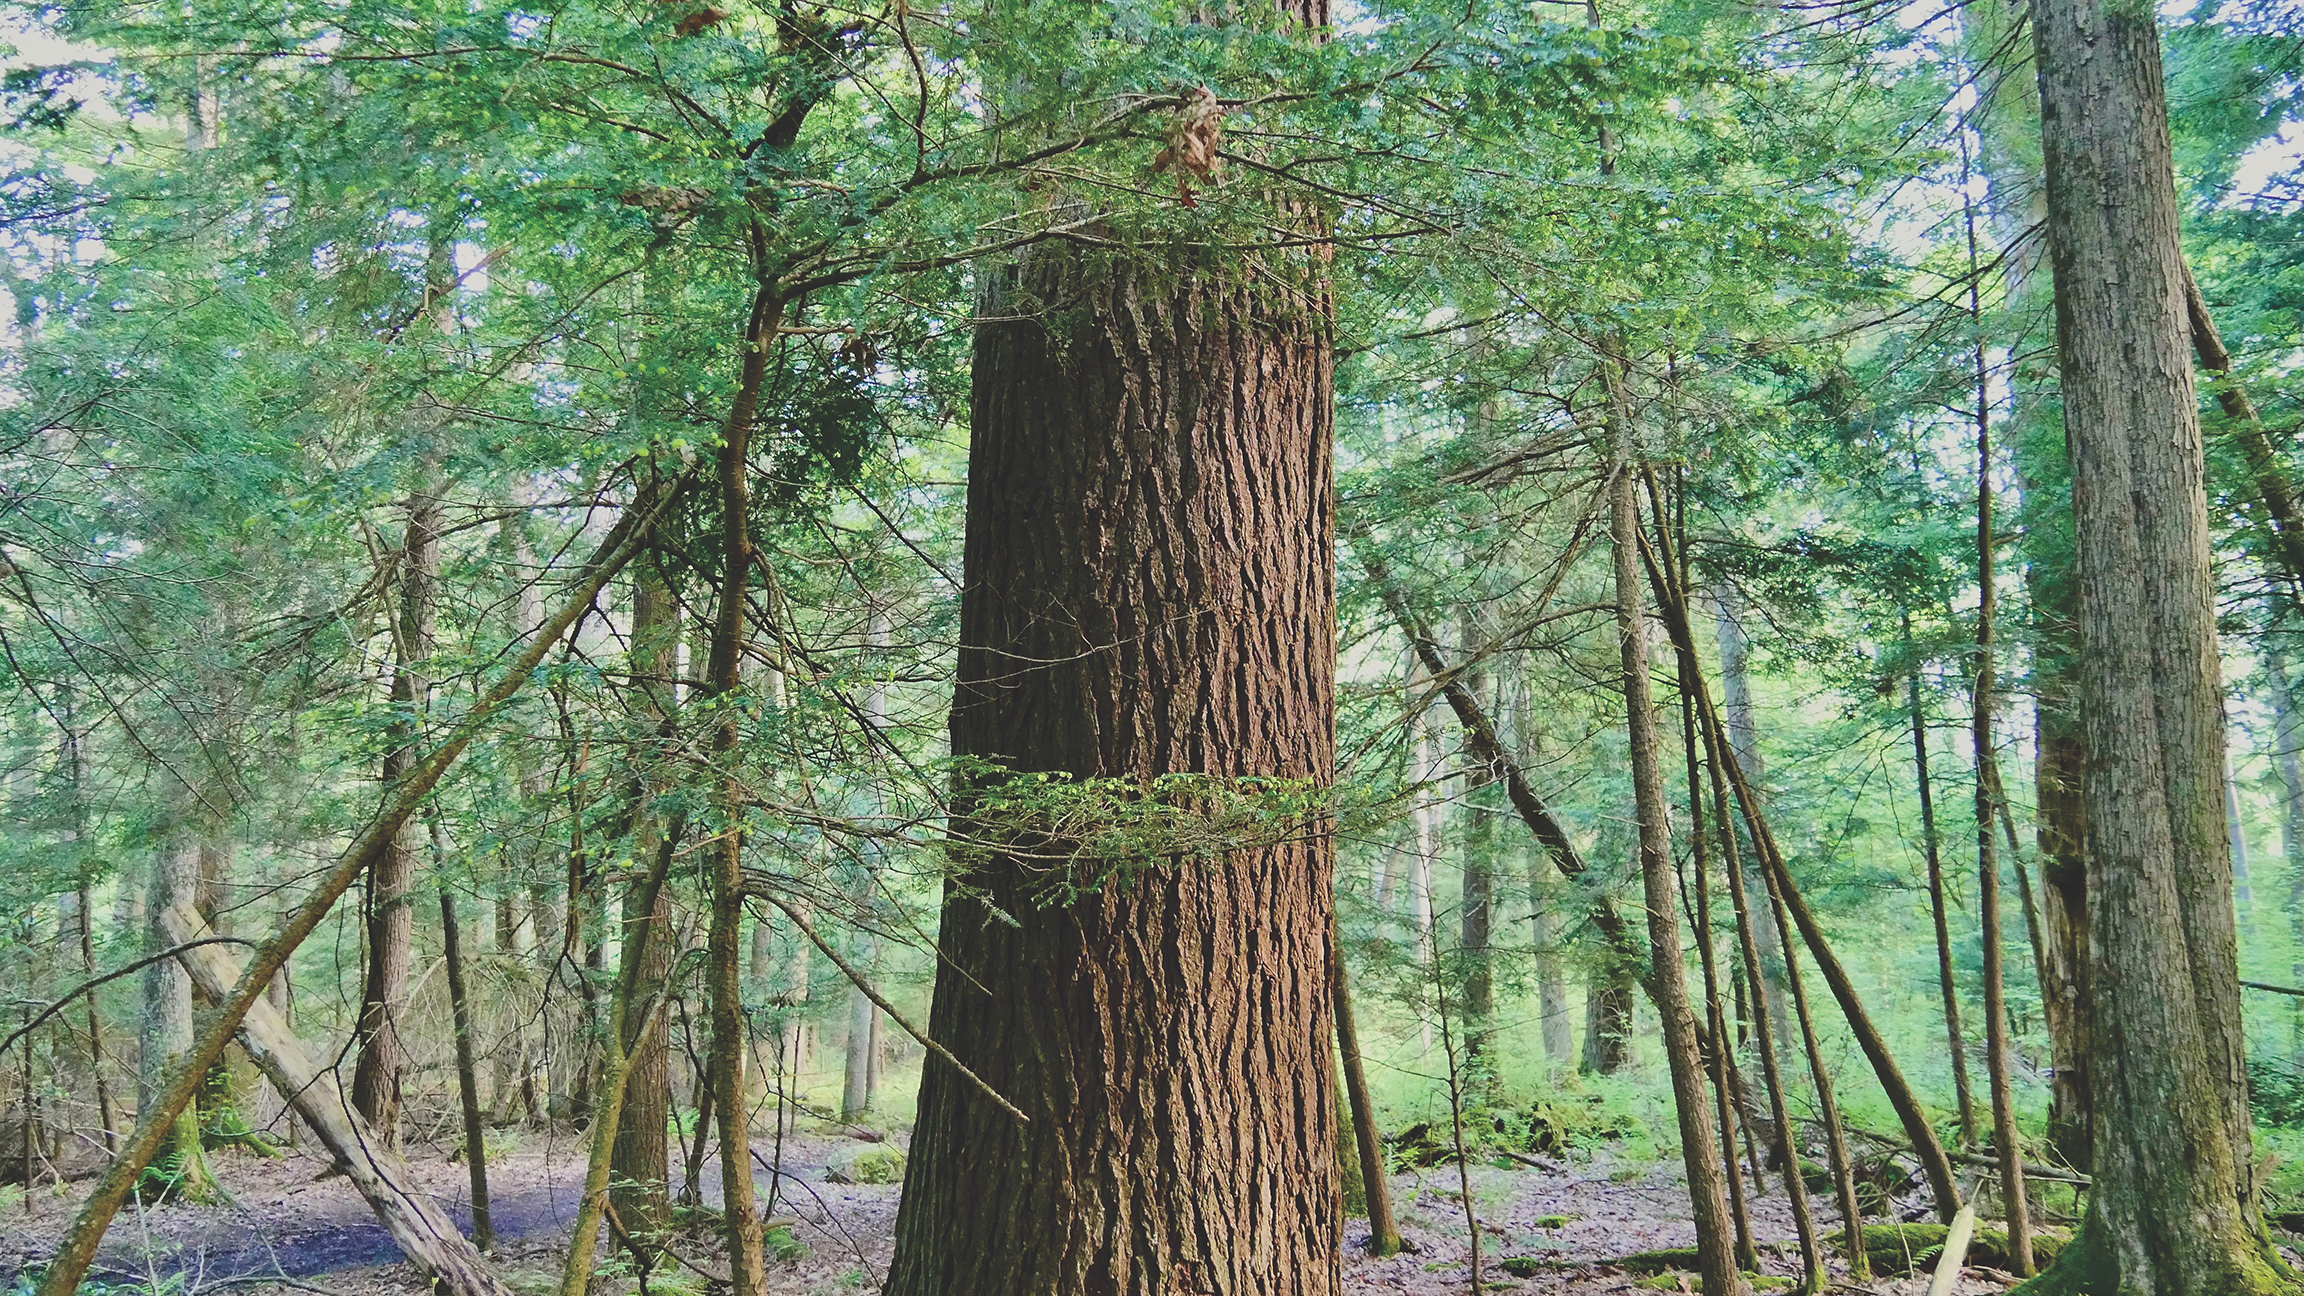 The thick trunk of a large mature tree dominates the foreground in a forest filled with younger, smaller trees.